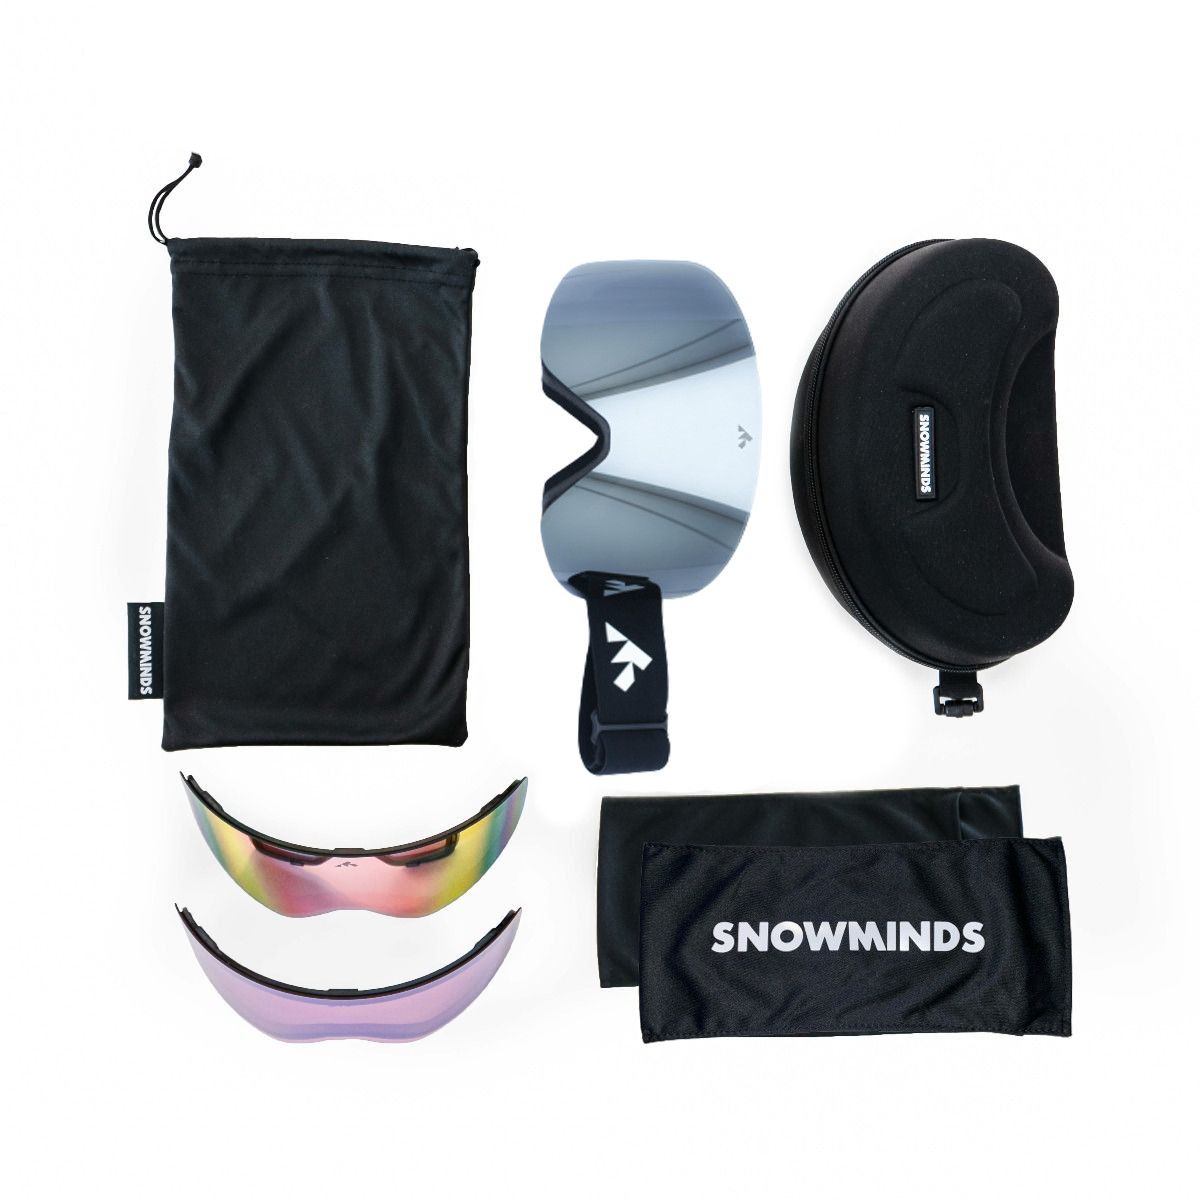 The Snowminds All Inclusive Magnet Goggles, sort